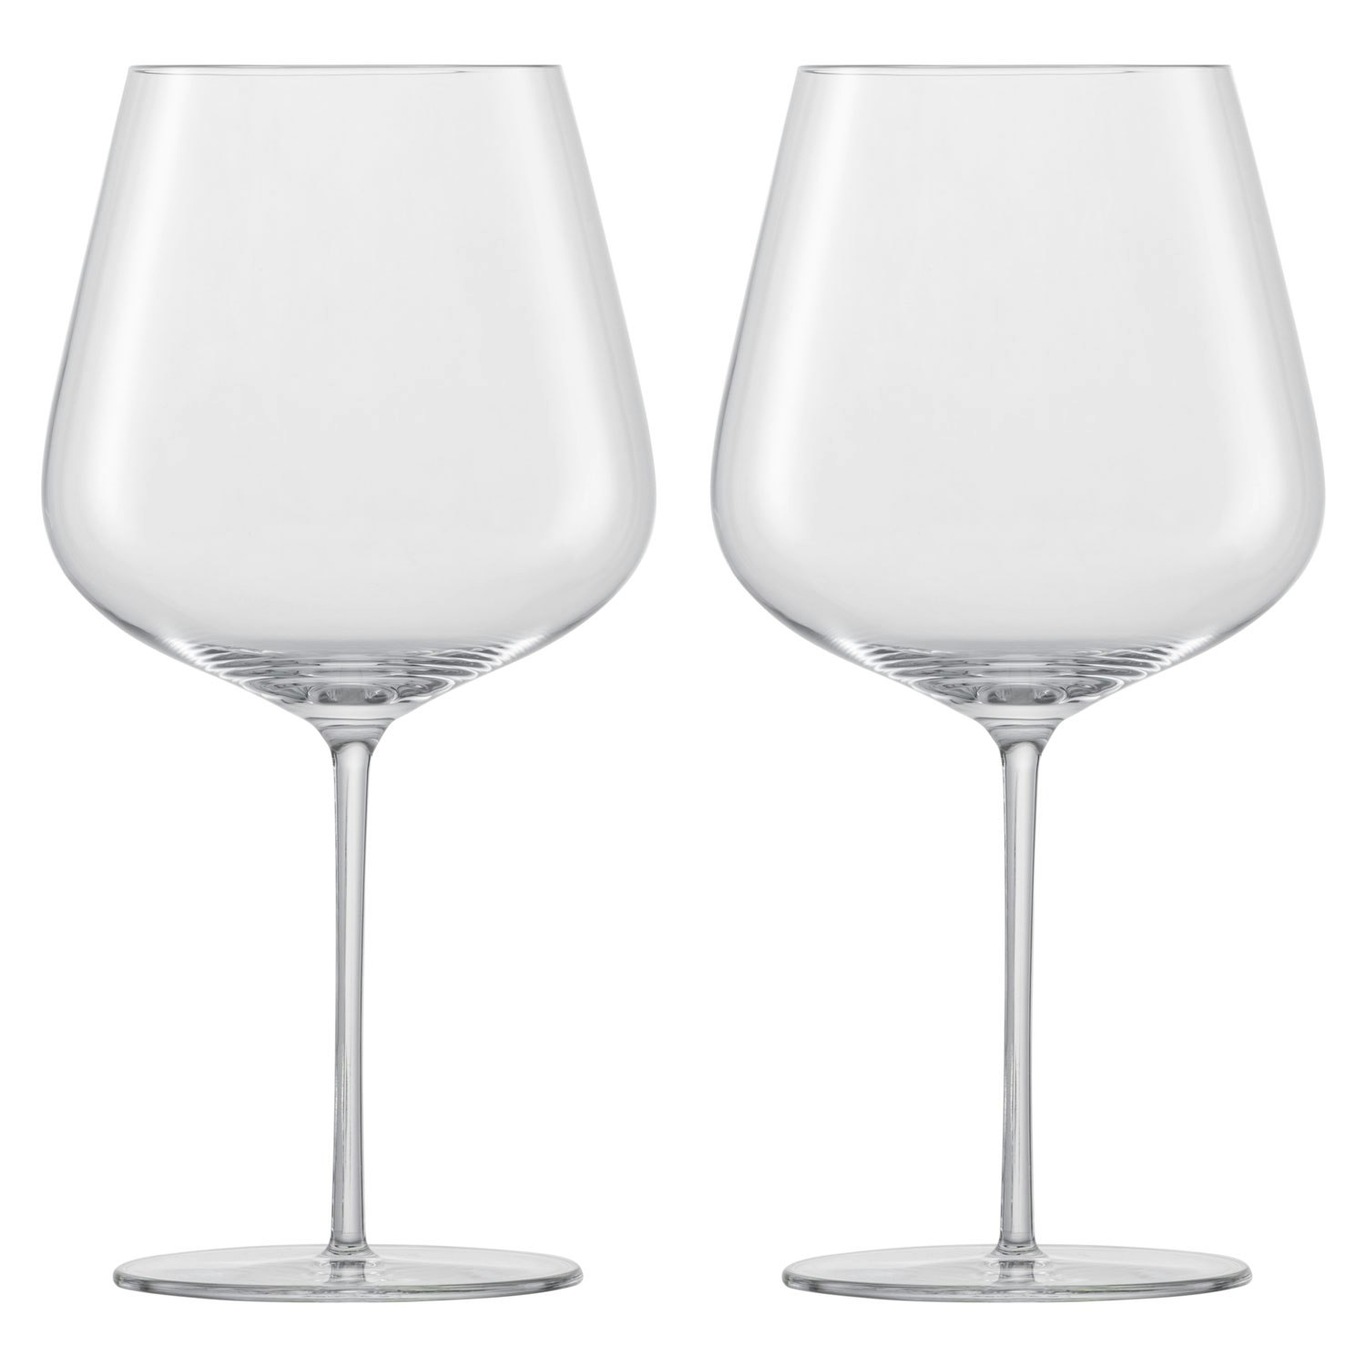 https://royaldesign.com/image/2/zwiesel-vervino-burgundy-red-wine-glass-95-cl-2-pack-0?w=800&quality=80